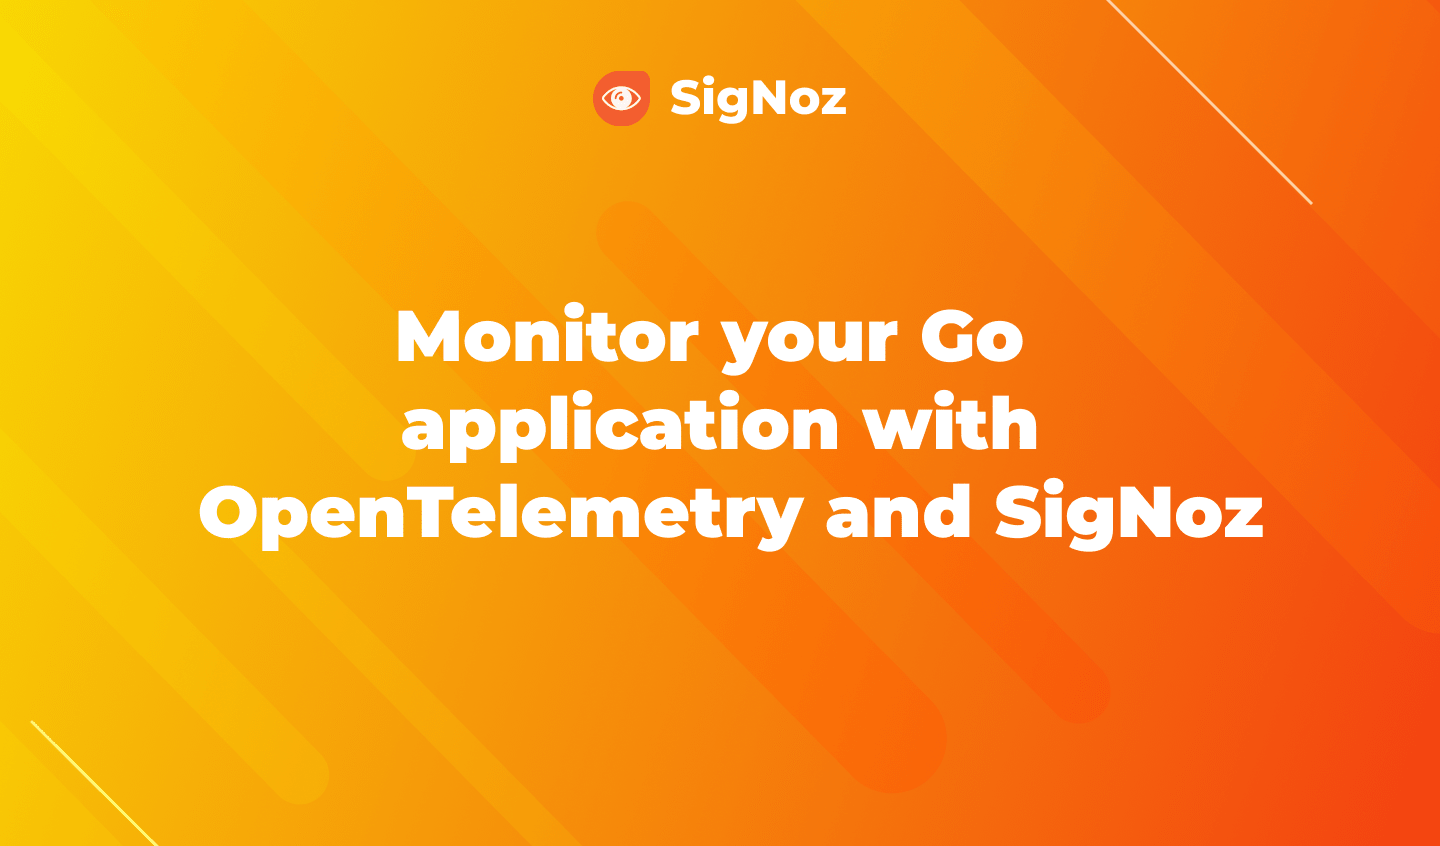 Monitor your Go applications with SigNoz